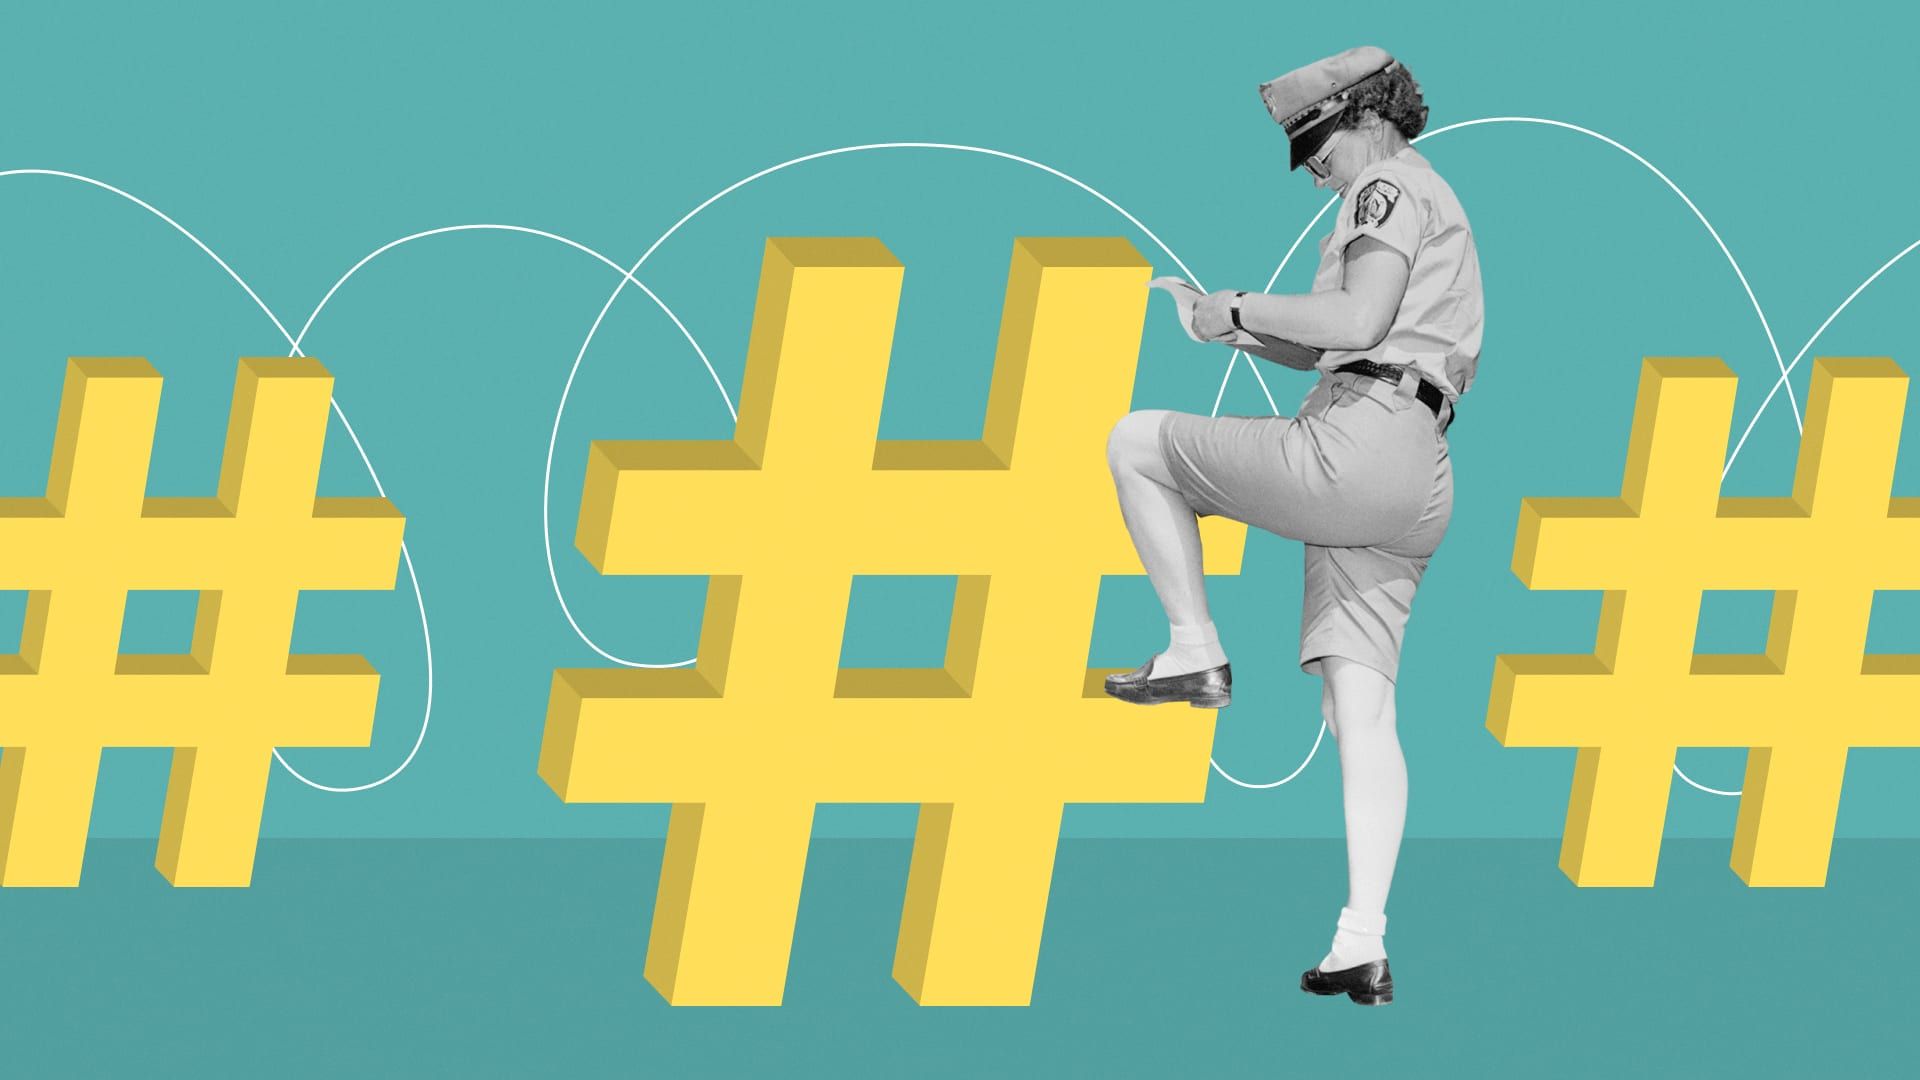 How To Use Hashtags To Grow Your Digital Business and Social Media Accounts